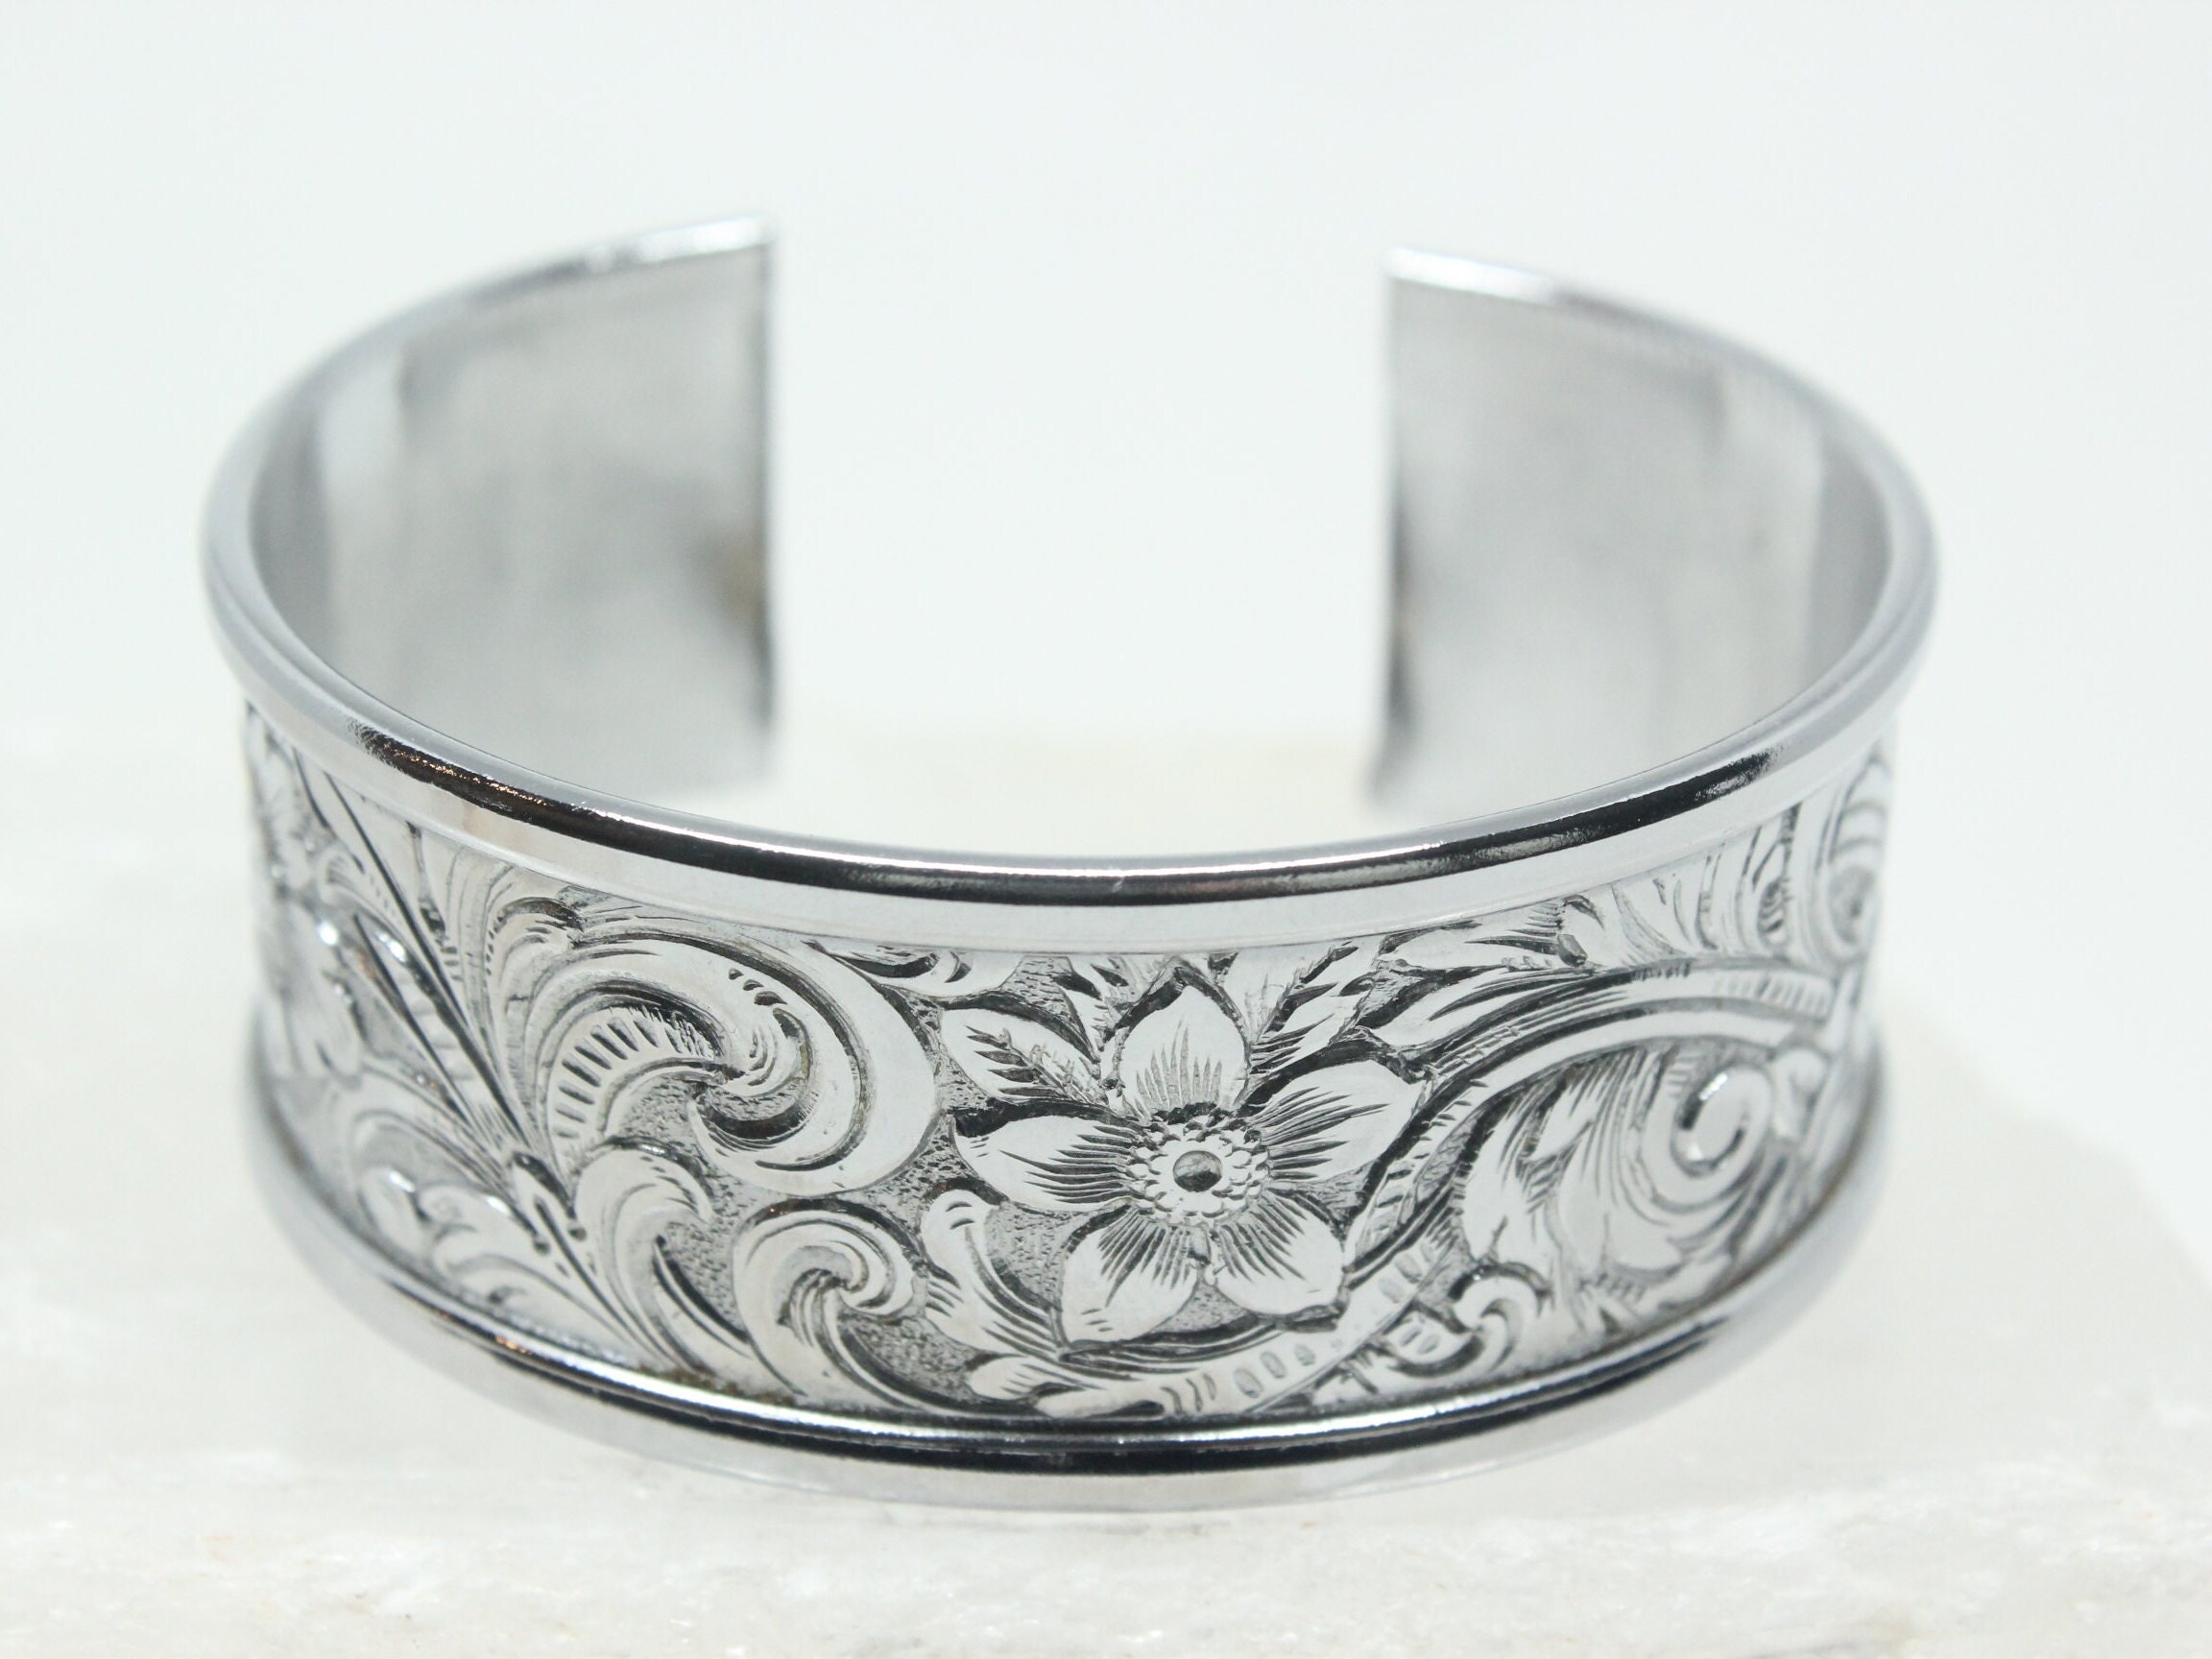  Pearlina Sterling Silver Locket Bracelet Bangle Cuff Etched  Floral Vintage Style for Woman 7: Clothing, Shoes & Jewelry